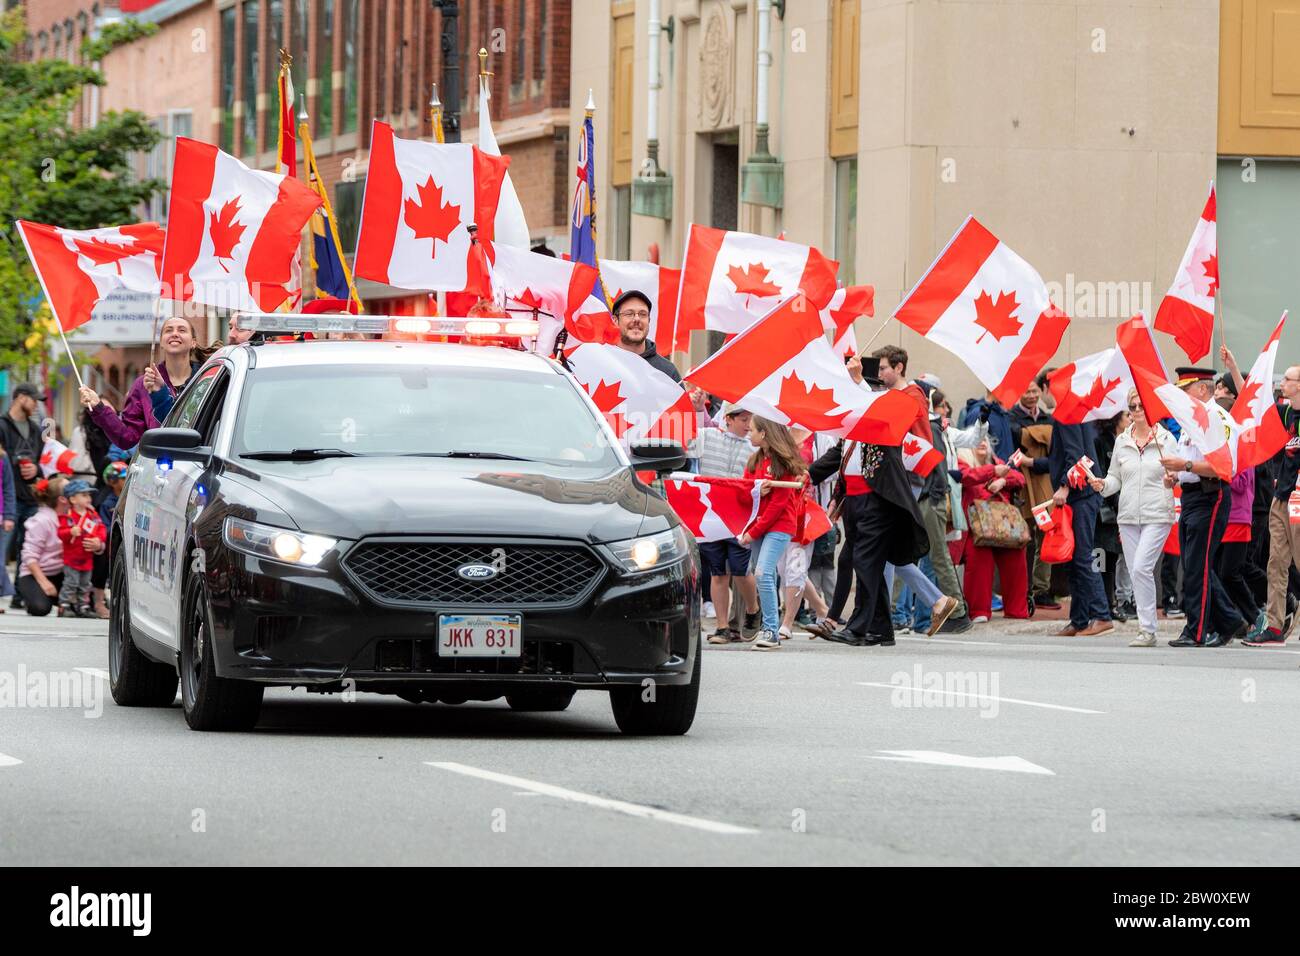 Saint John, New Brunswick, Canada - July 1, 2019: A police car leads the Canada Day parade. Many people with Canadian flags follow. Stock Photo